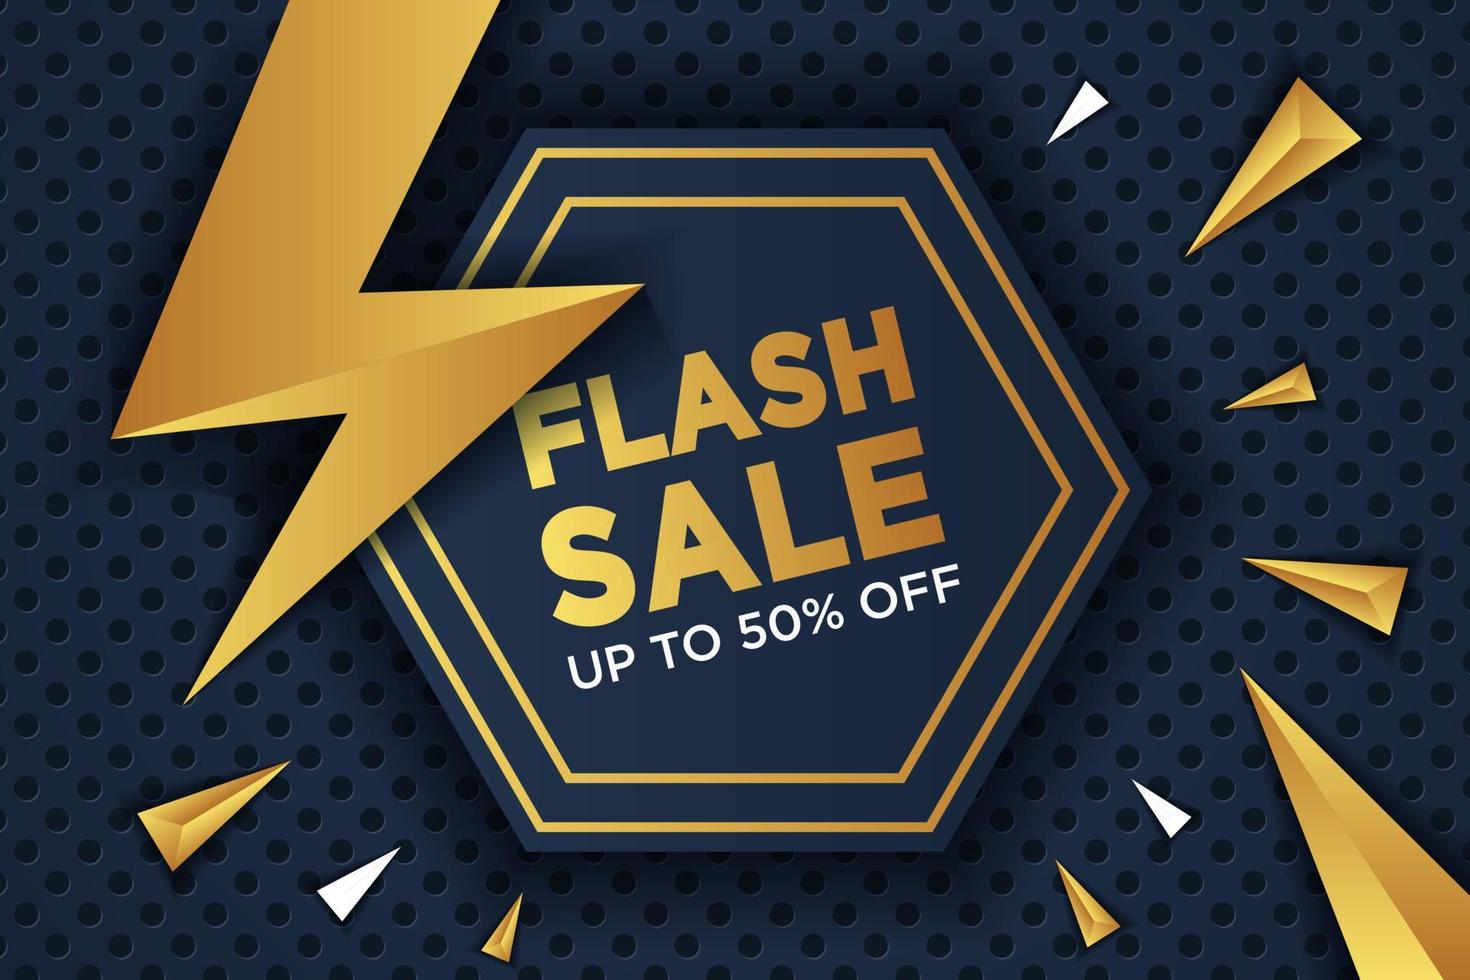 mega flash sales banners with black gold for sales vector